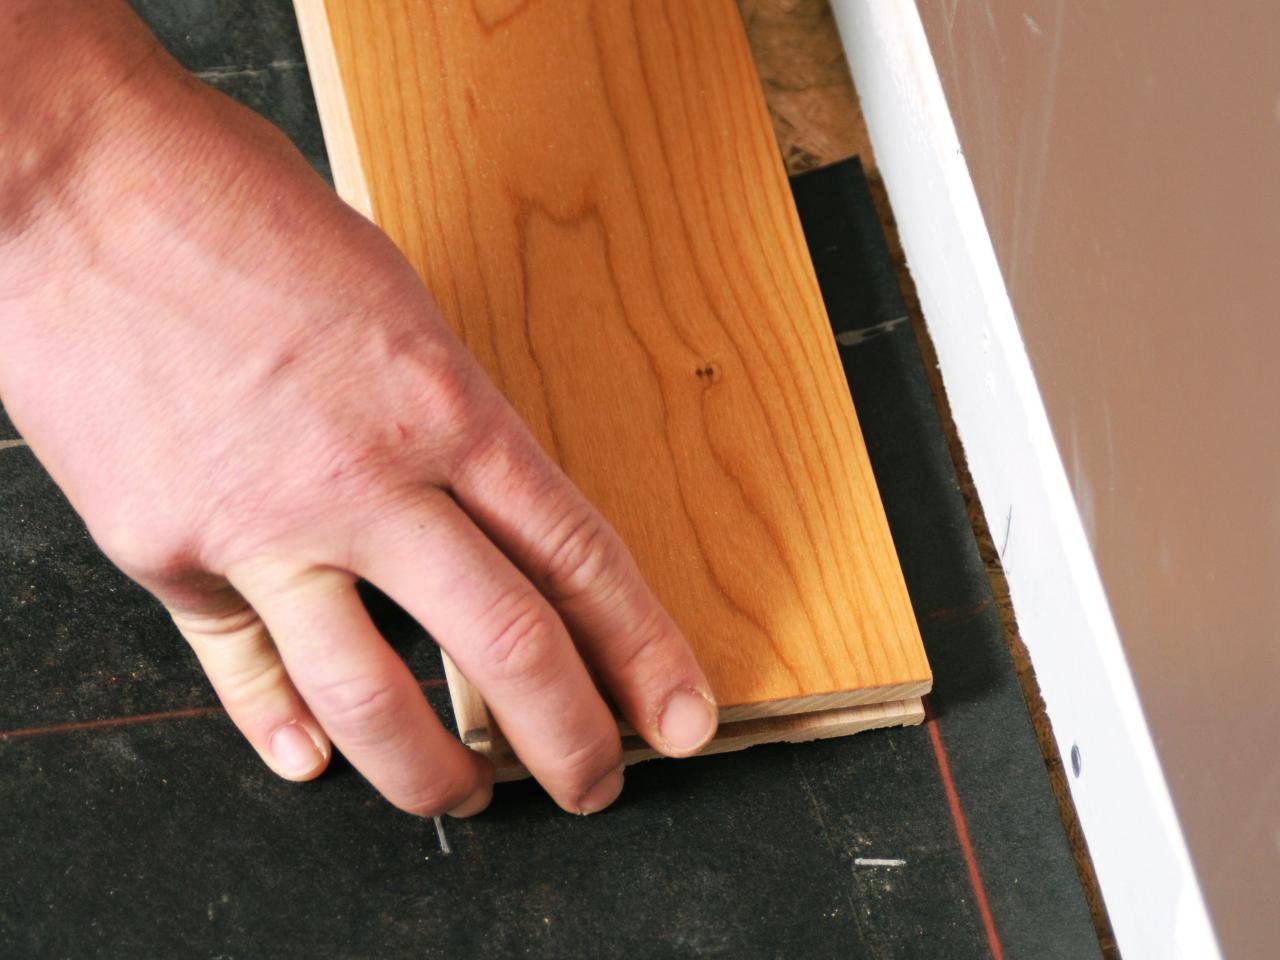 How To Install Prefinished Solid, Filling Nail Holes In Prefinished Hardwood Floors